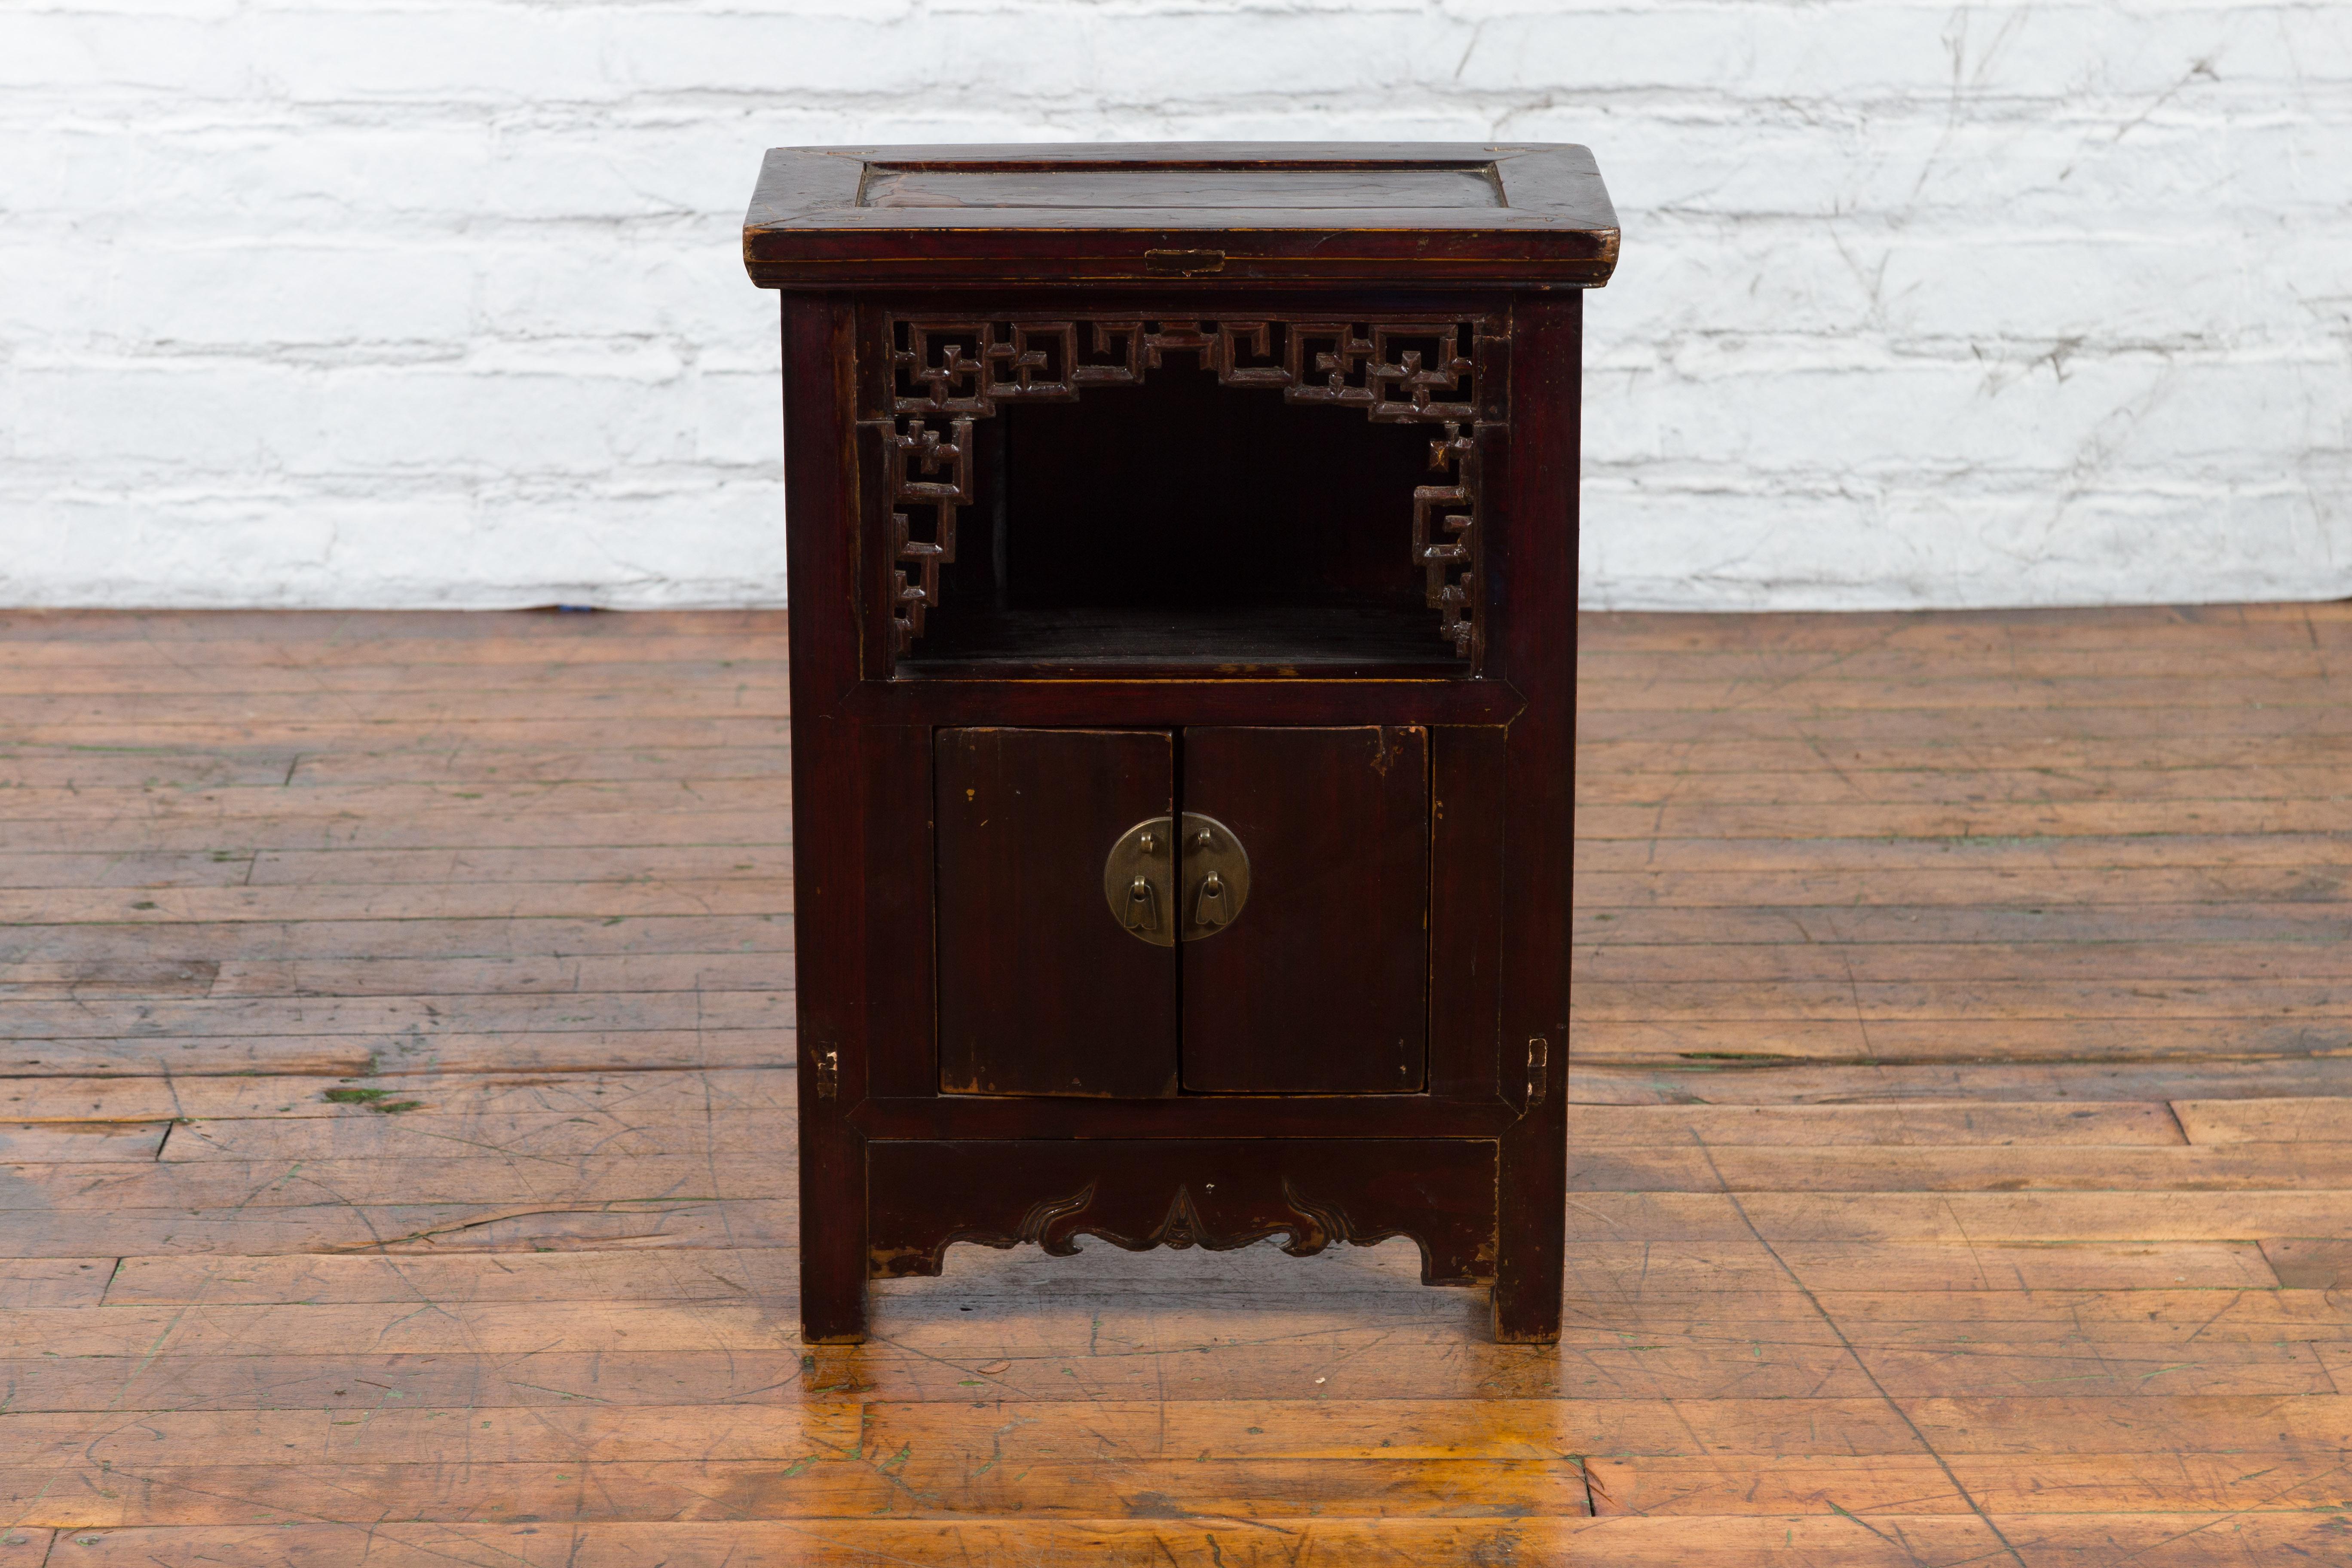 A Chinese Qing Dynasty period dark brown lacquer side cabinet from the 19th century with fretwork motifs, open shelf and double doors. Created in China during the Qing Dynasty in the 19th century, this side cabinet features a dark reddish brown